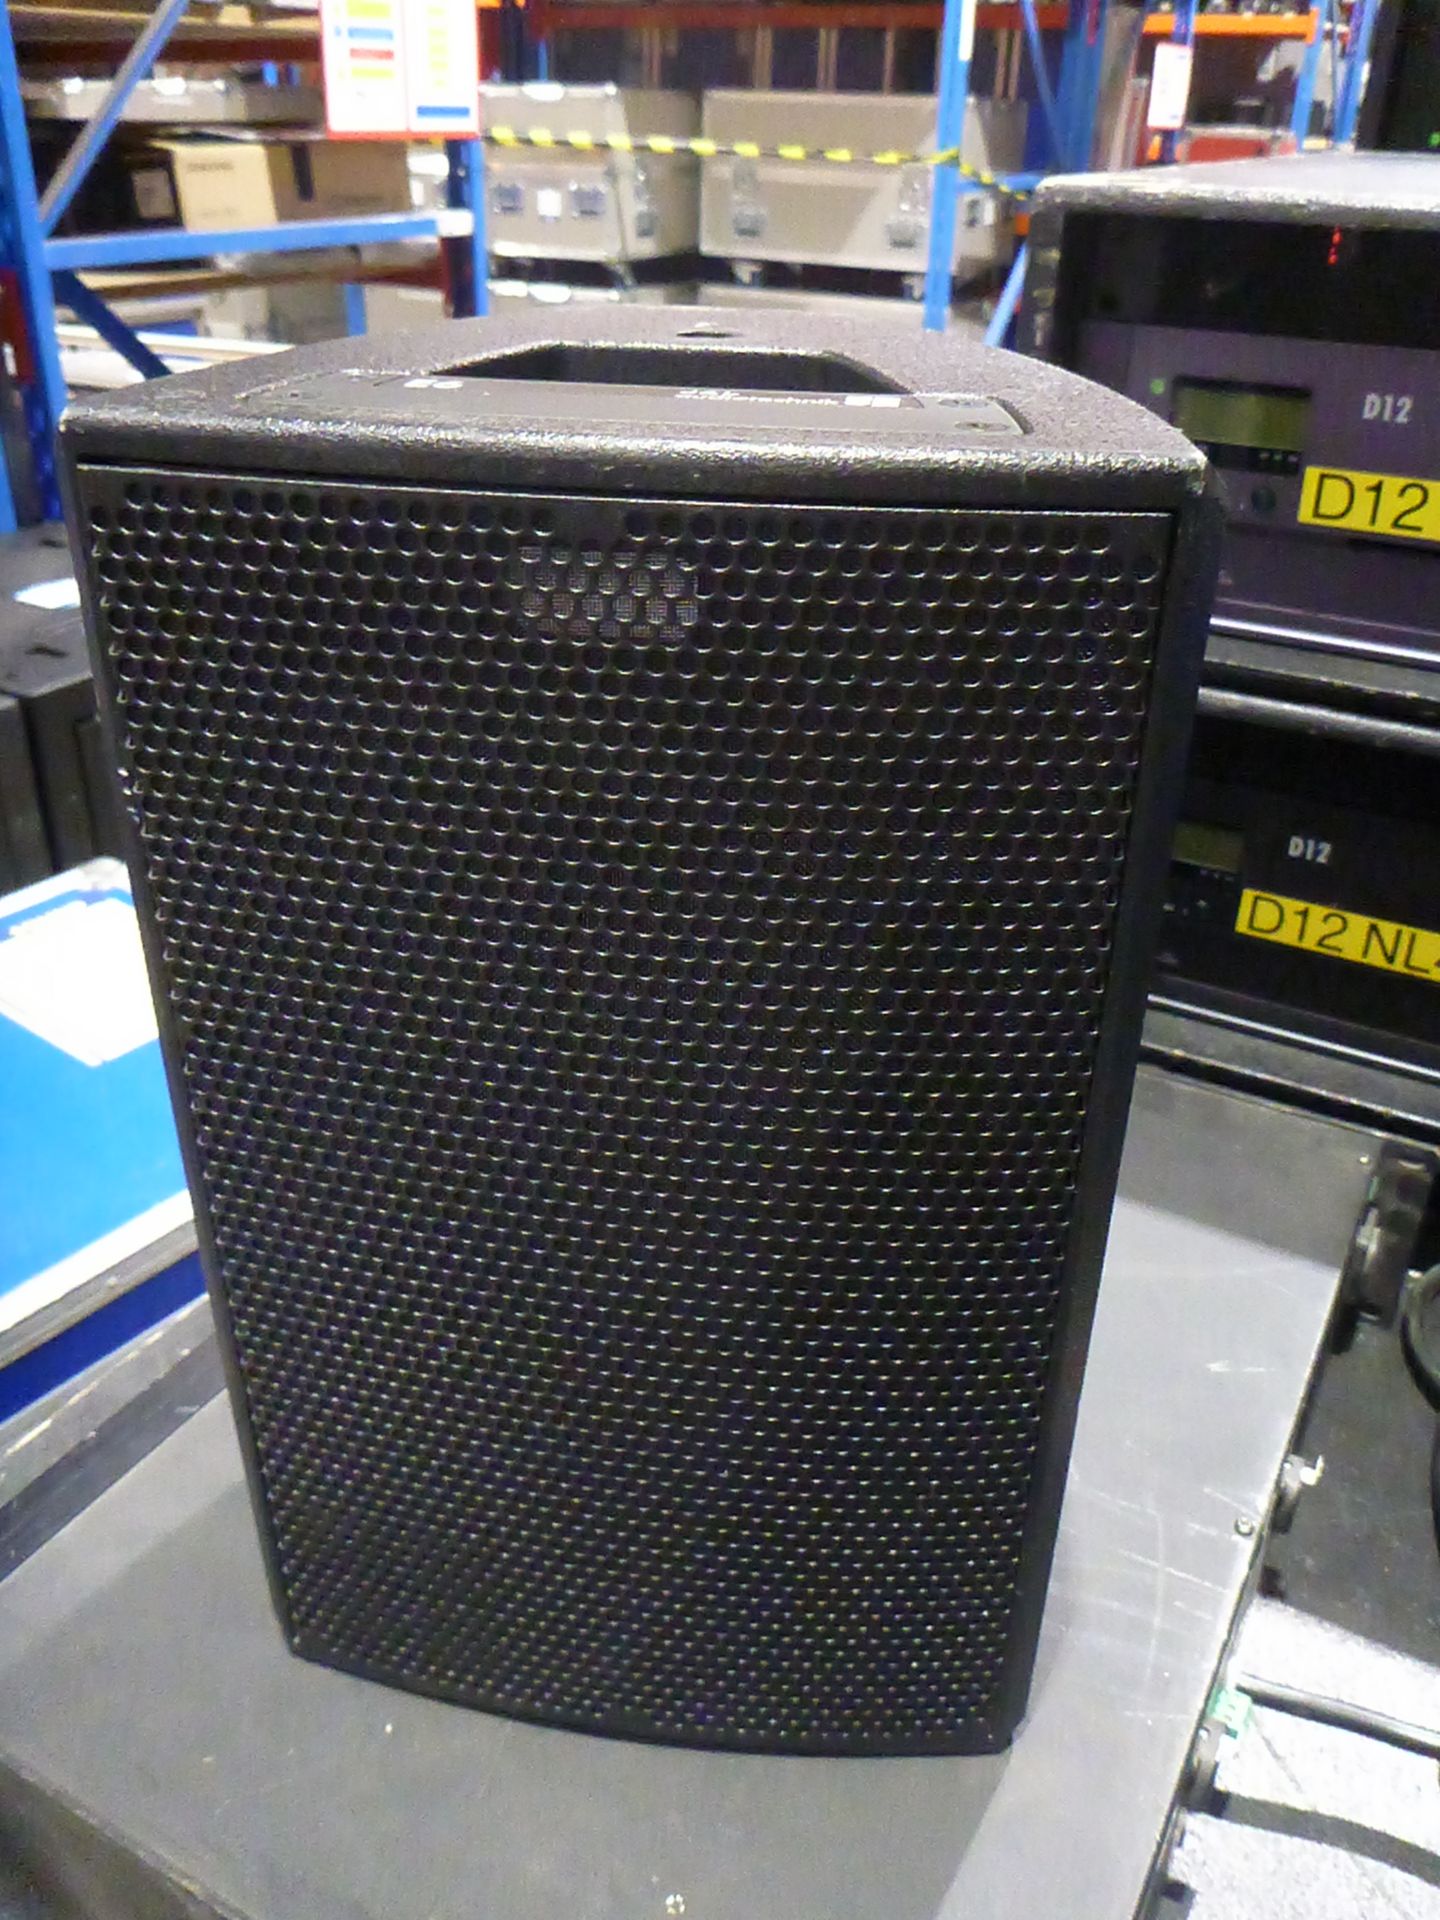 D & B Audiotecknik E6 Loundspeakers (Qty 4) In flight case with fly bar and top hat, No safetys, S/ - Image 2 of 5